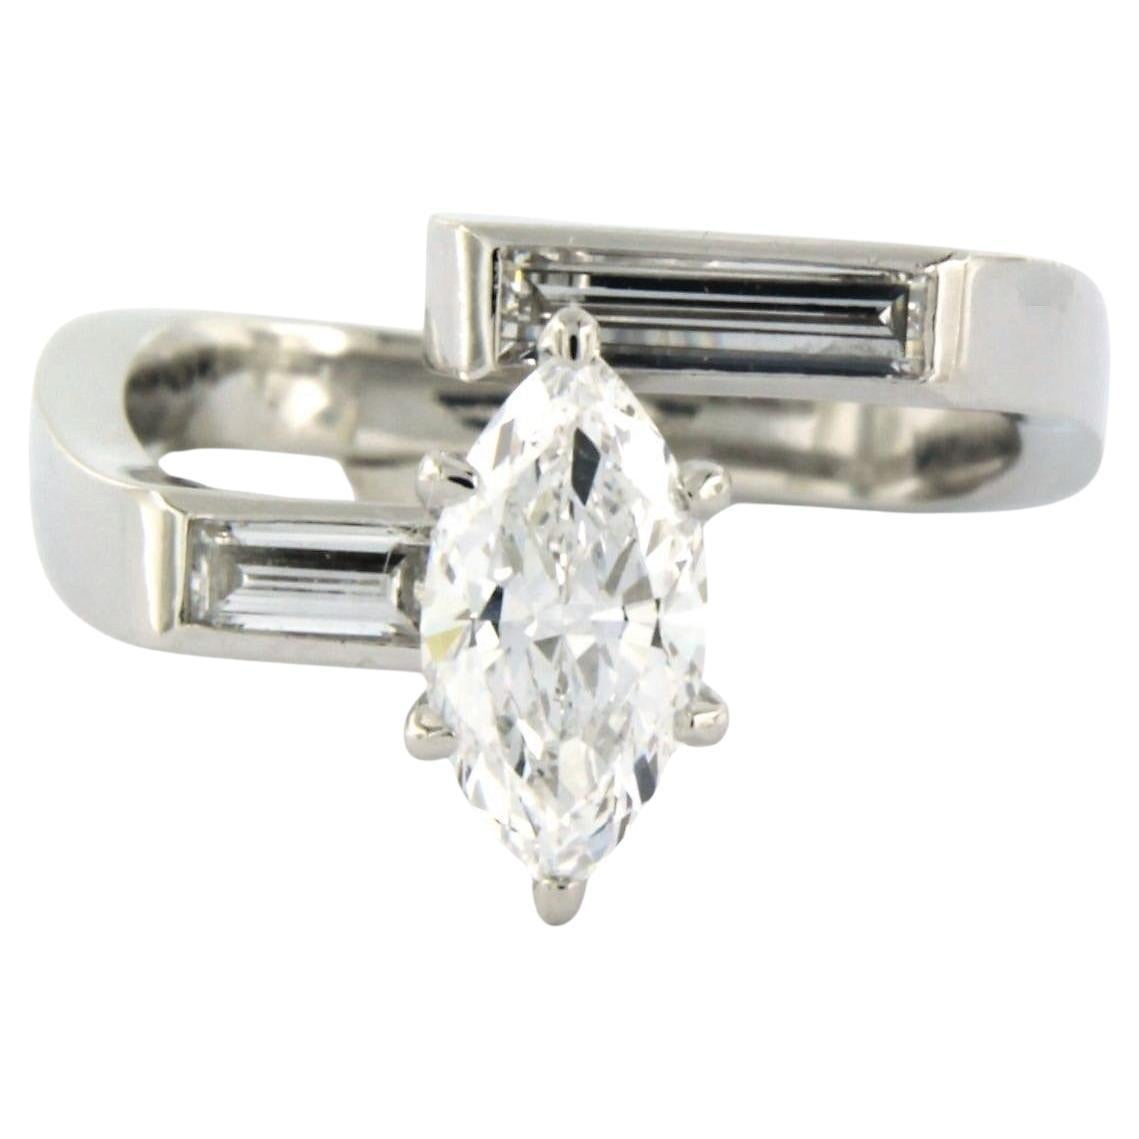 Ring with baguette and marquise diamonds up to 1.40ct 950 Platinum